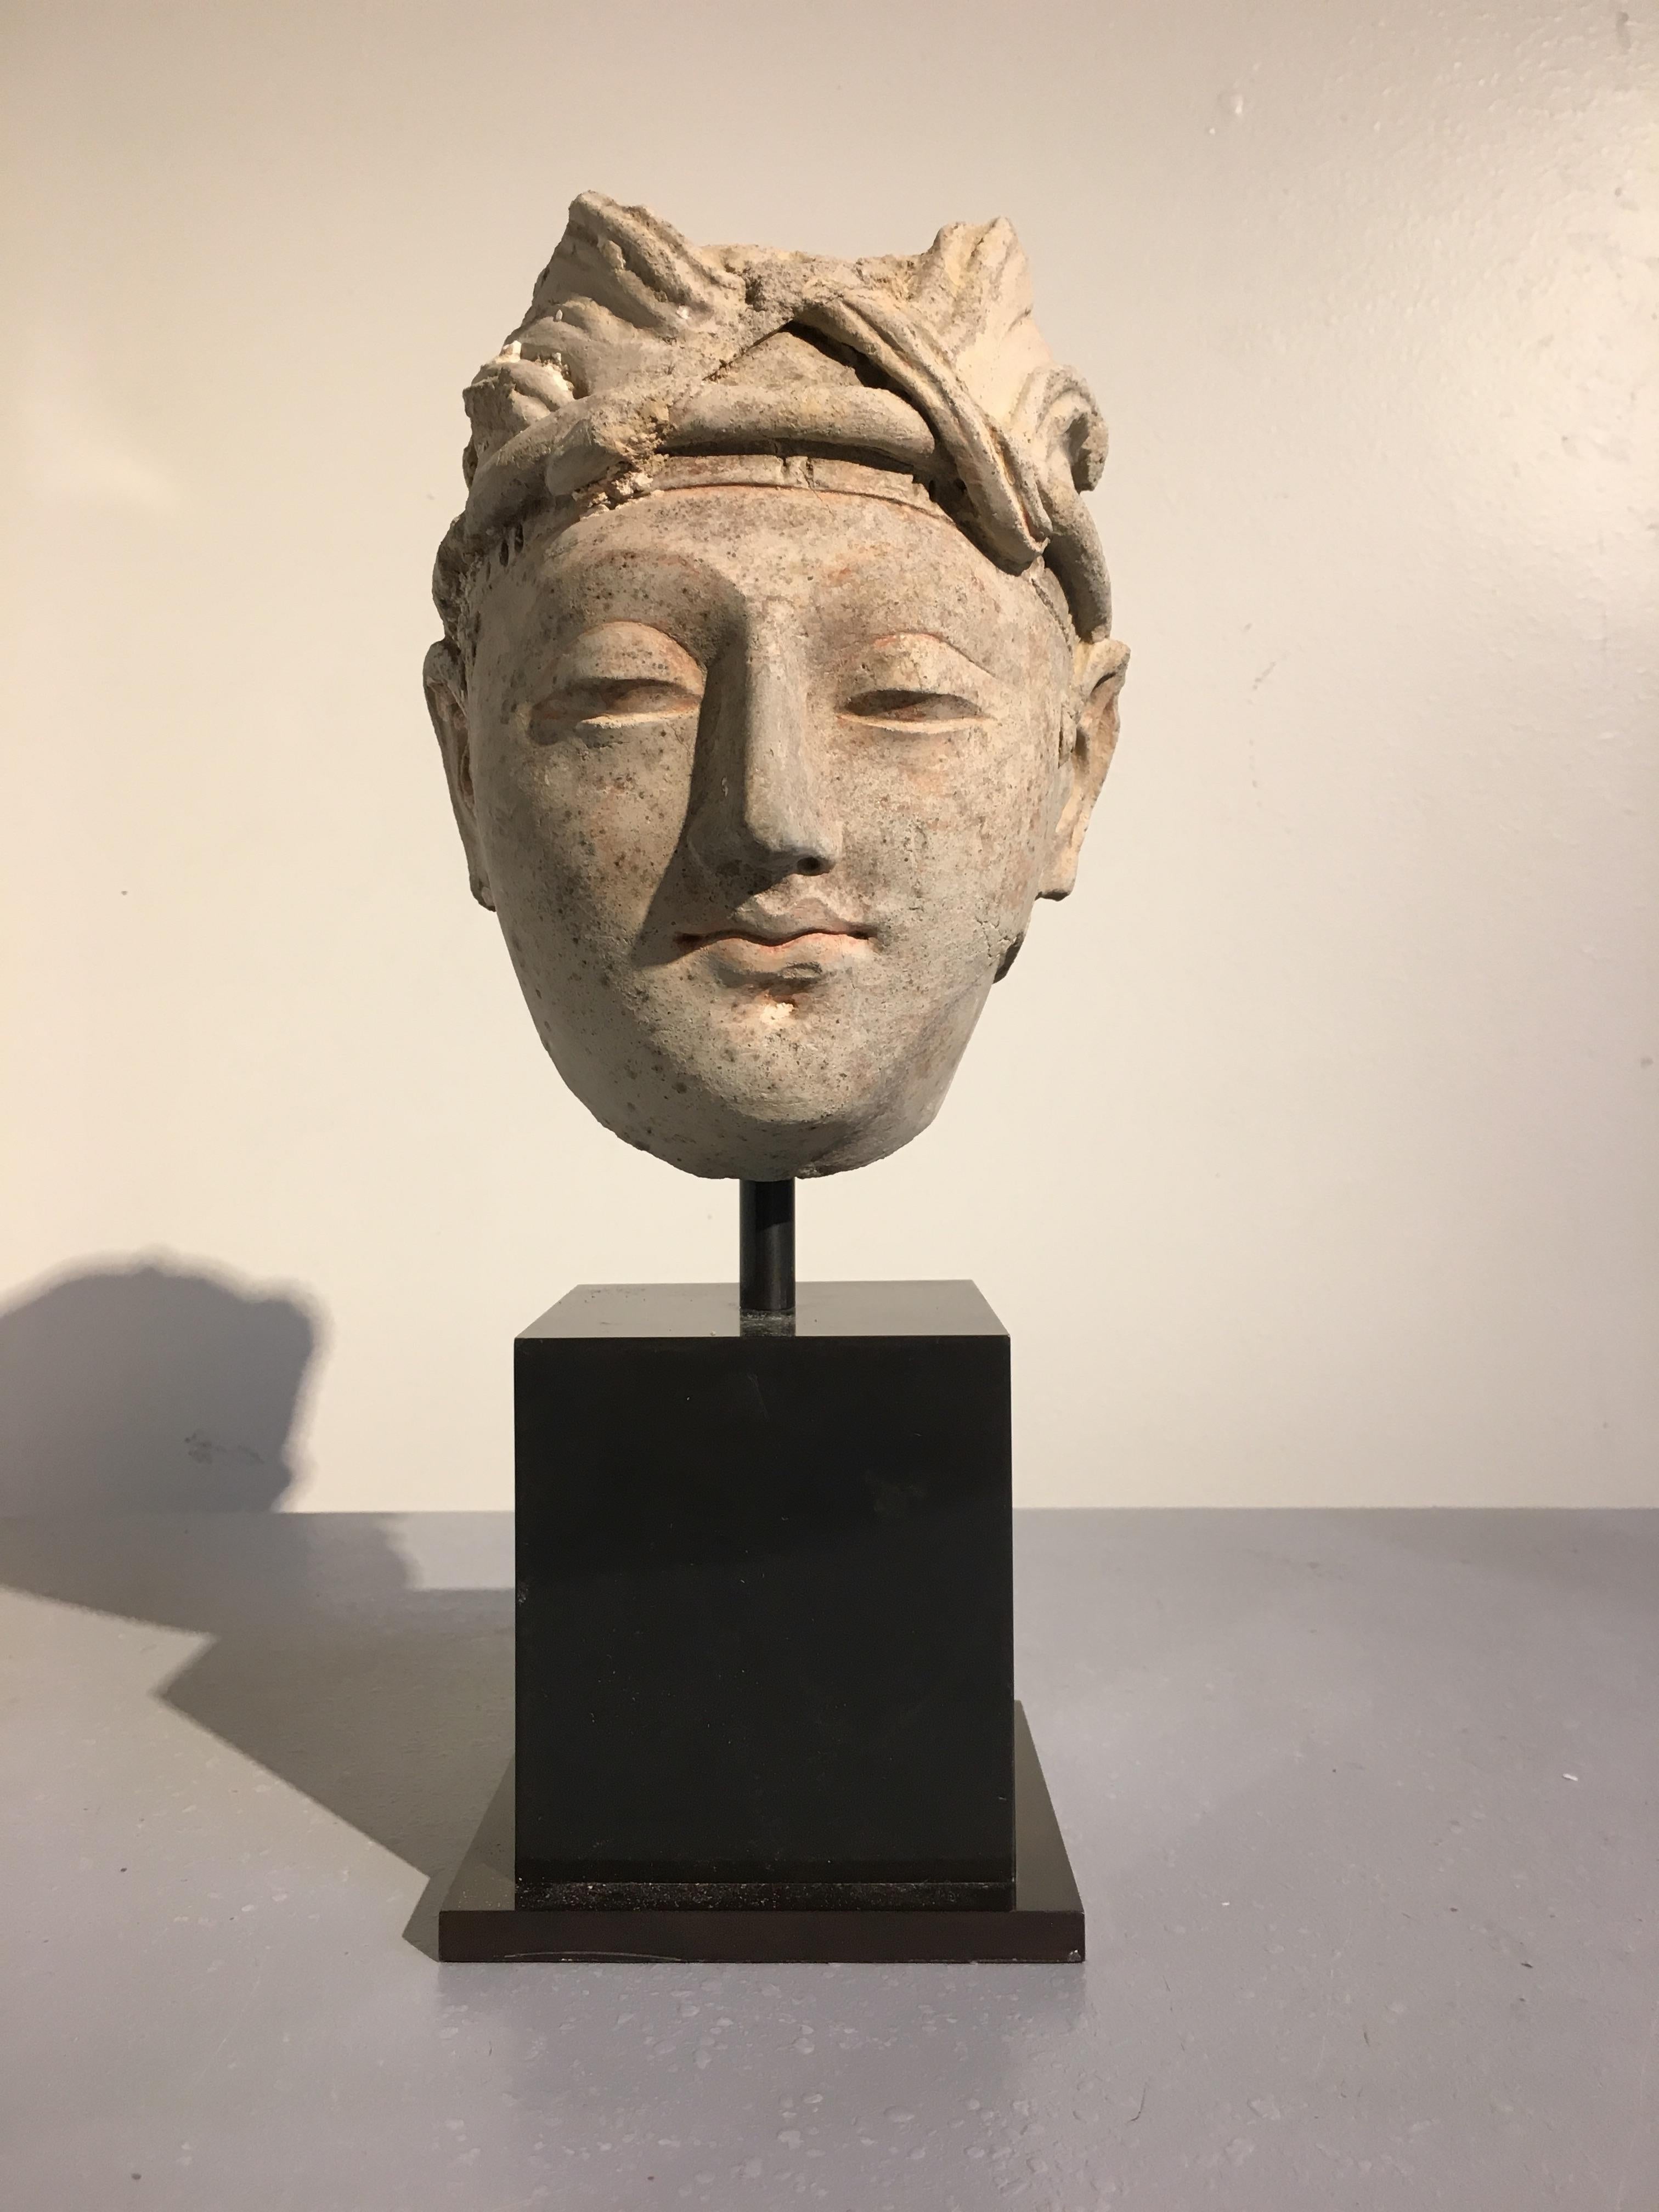 A sublime molded stucco head of a young male donor from the ancient region of Gandhara, 4th-5th century. 

The youthful nobleman sculpted in an idealized manner, with soft and kind features, a benign expression on his face. He wears a pleated